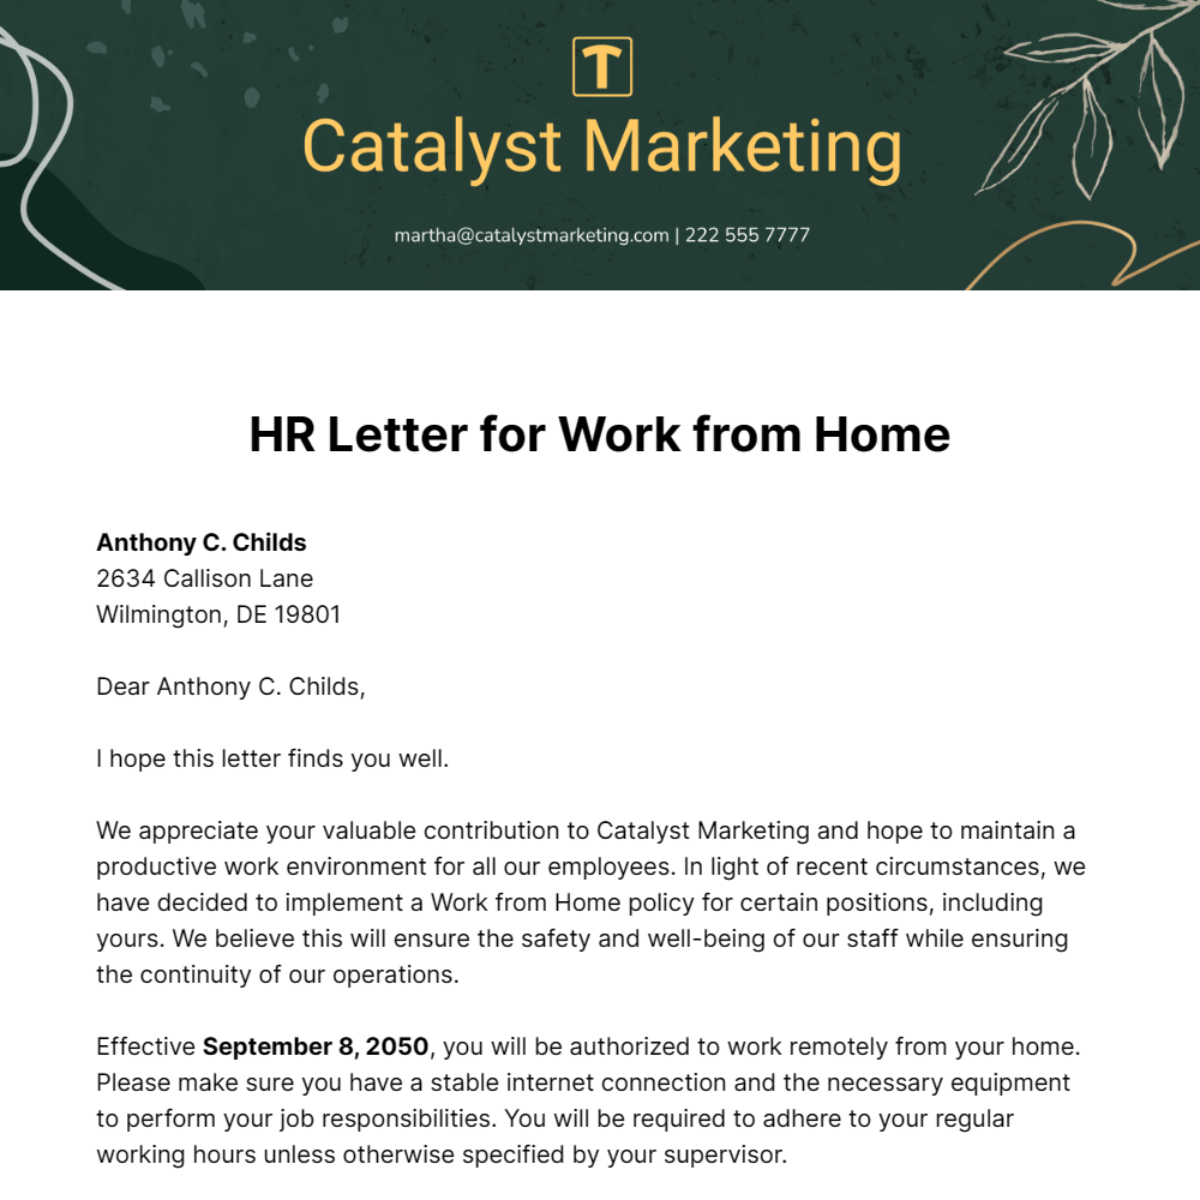 HR Letter for Work from Home Template